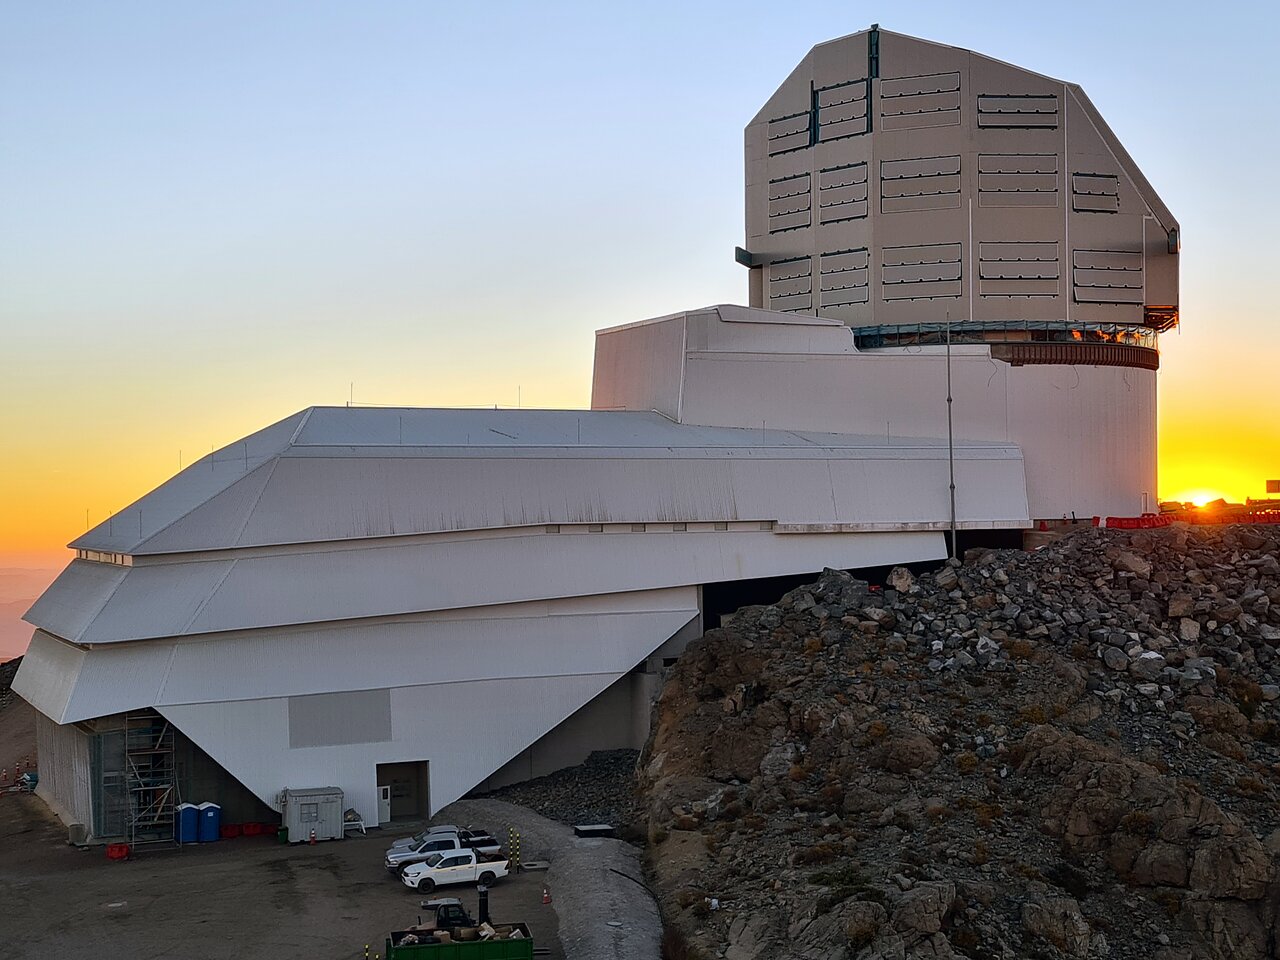 View of the Vera Rubin observatory dome in the sunset.